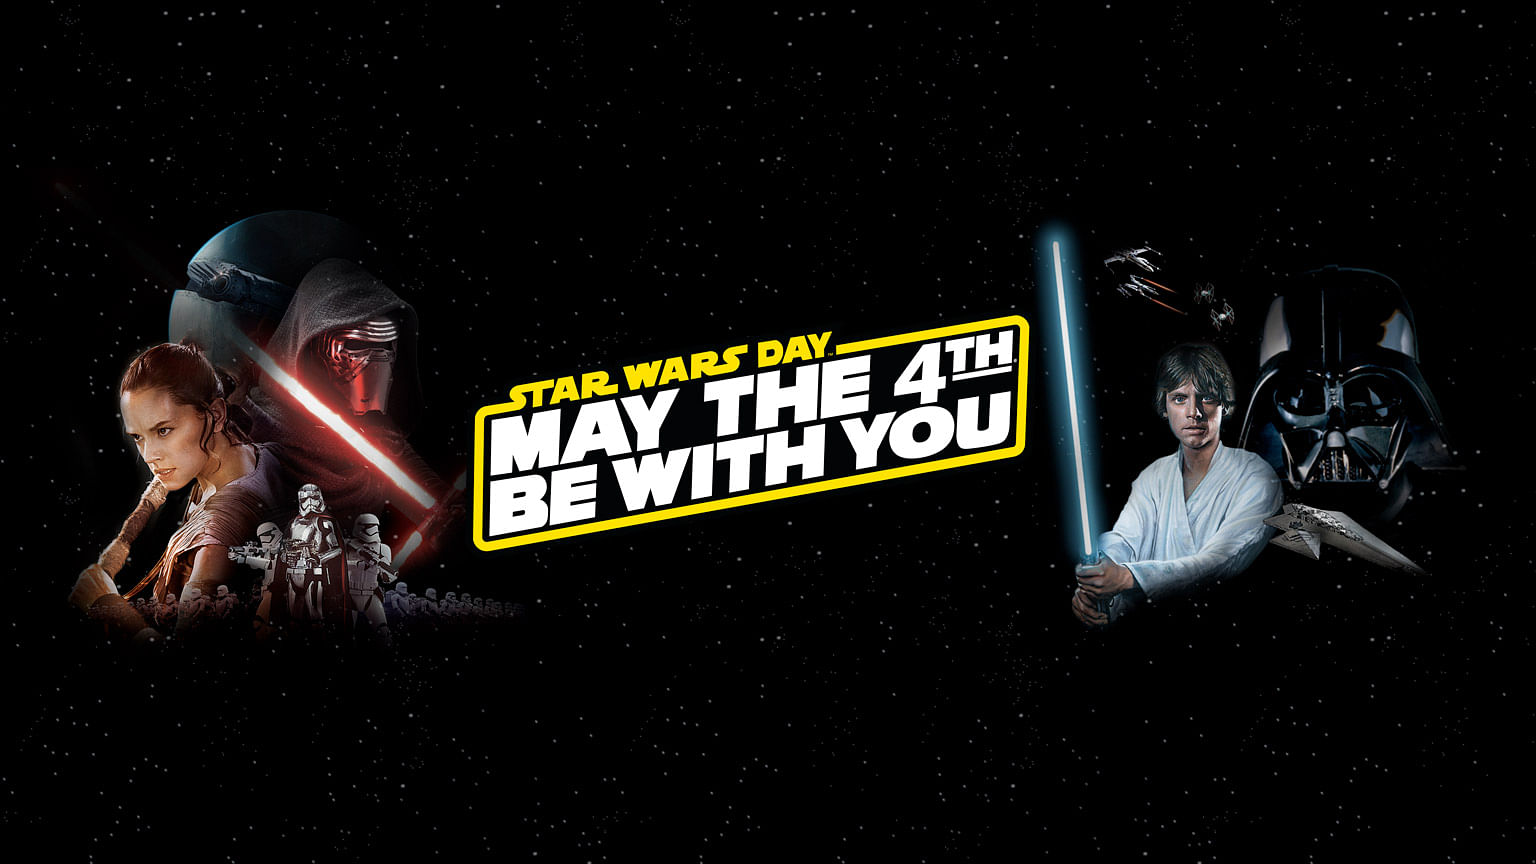 The poster of Star Wars Day - May The 4th Be With You. (Courtesy: https://www.starwars.com)